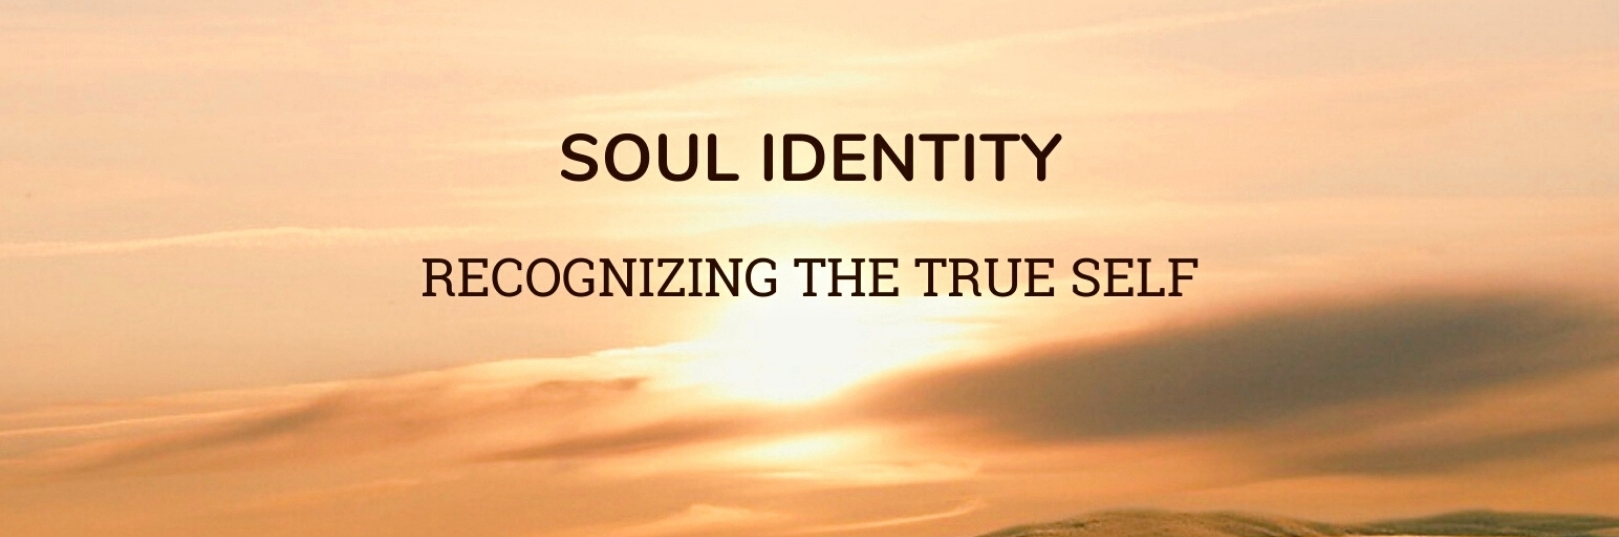 3.  Soul Identity: Intro Goes Here